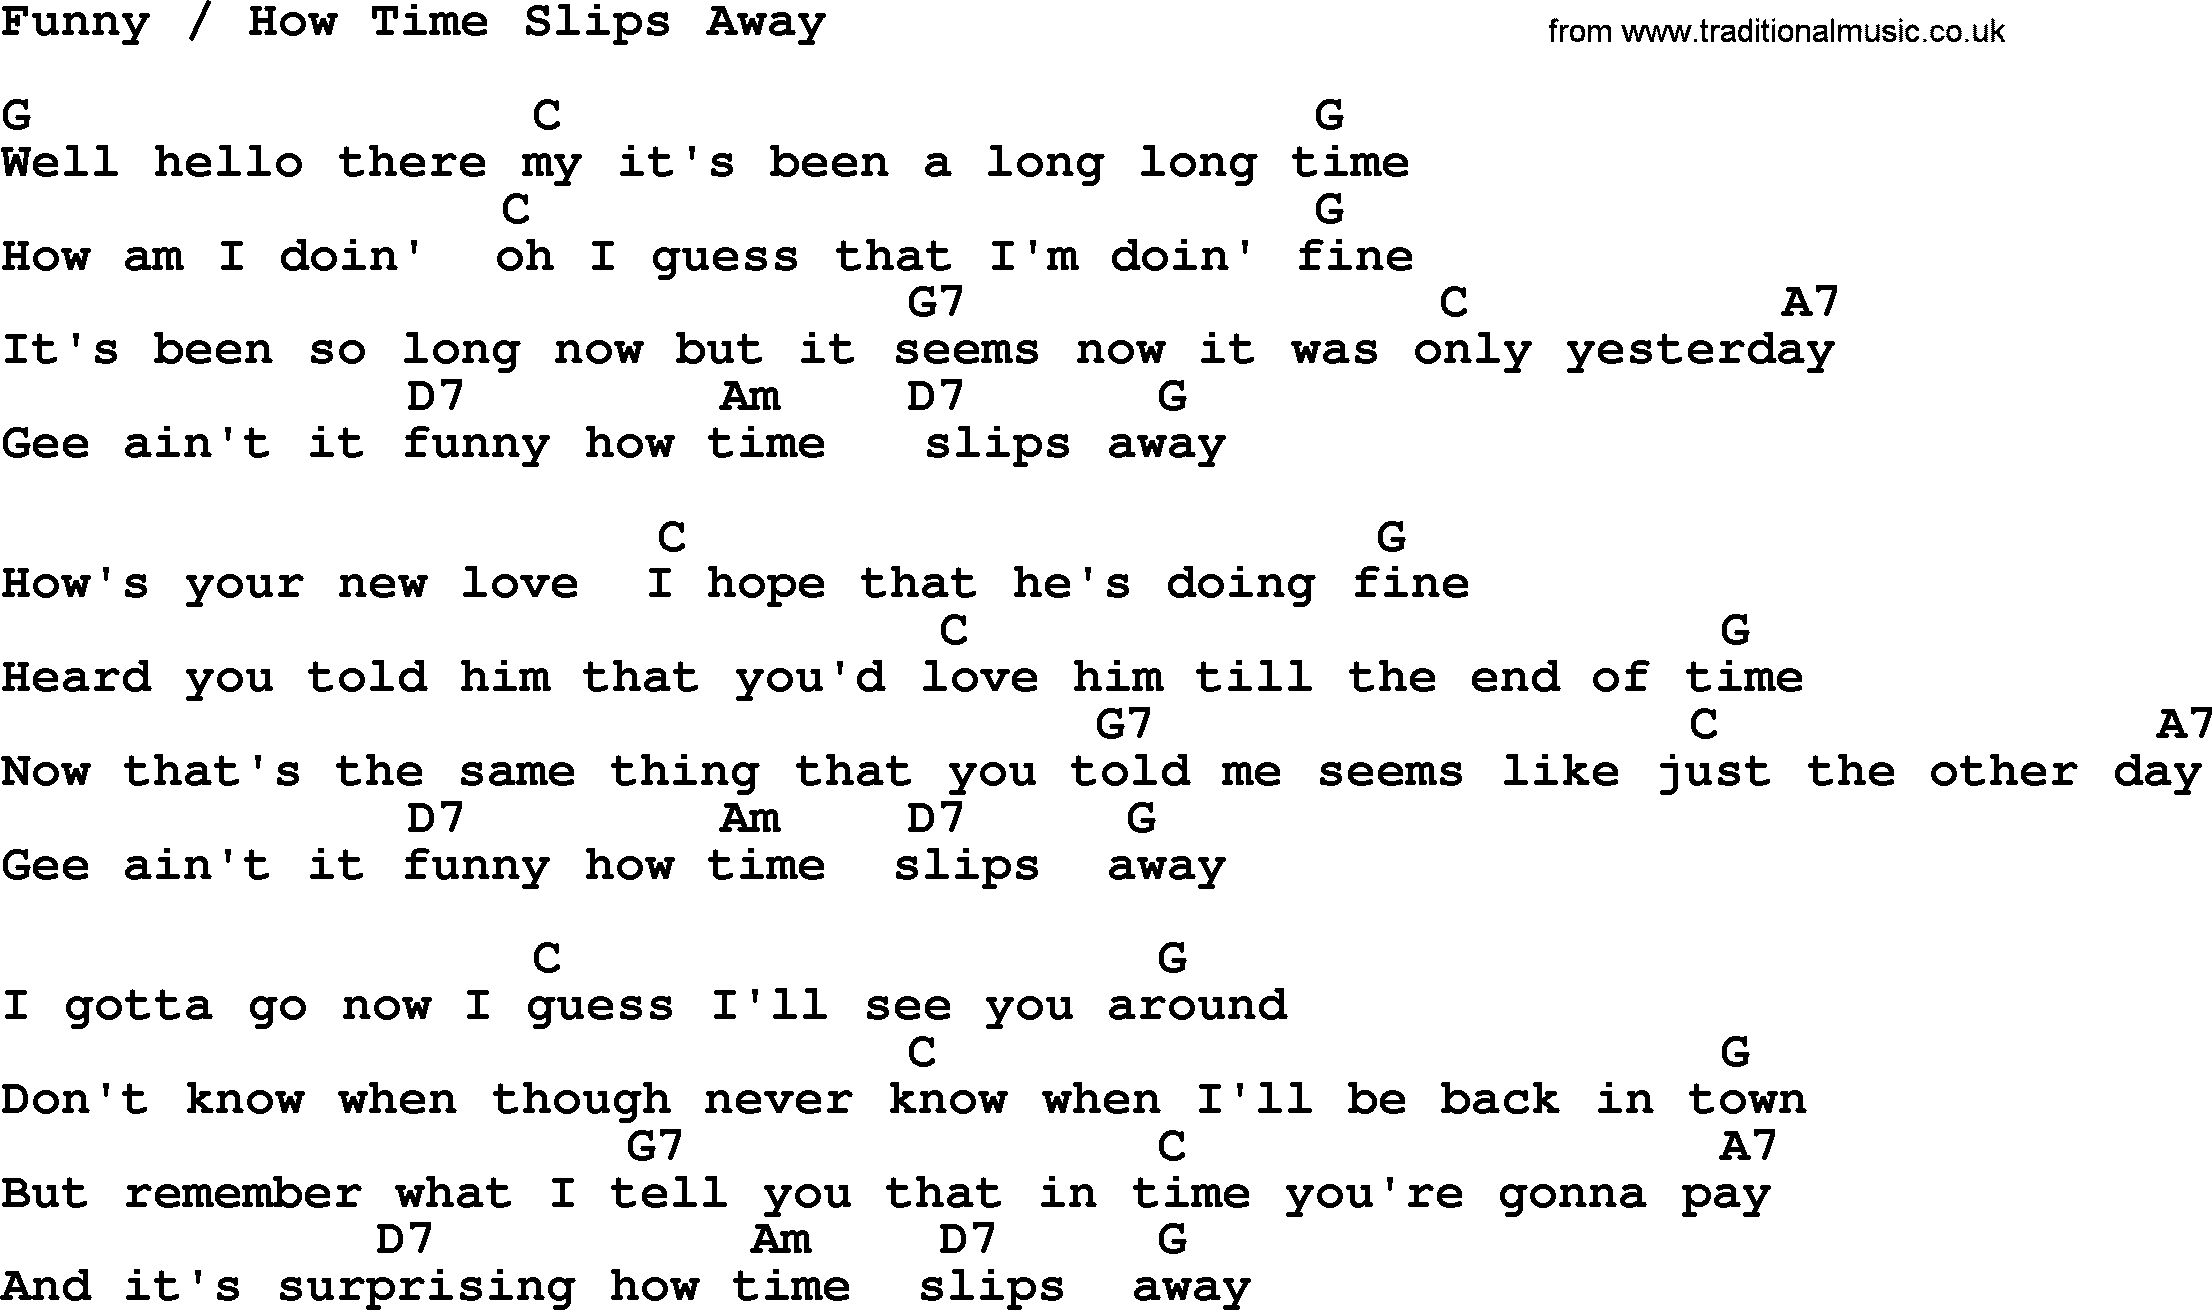 Willie Nelson song: Funny How Time Slips Away, lyrics and chords